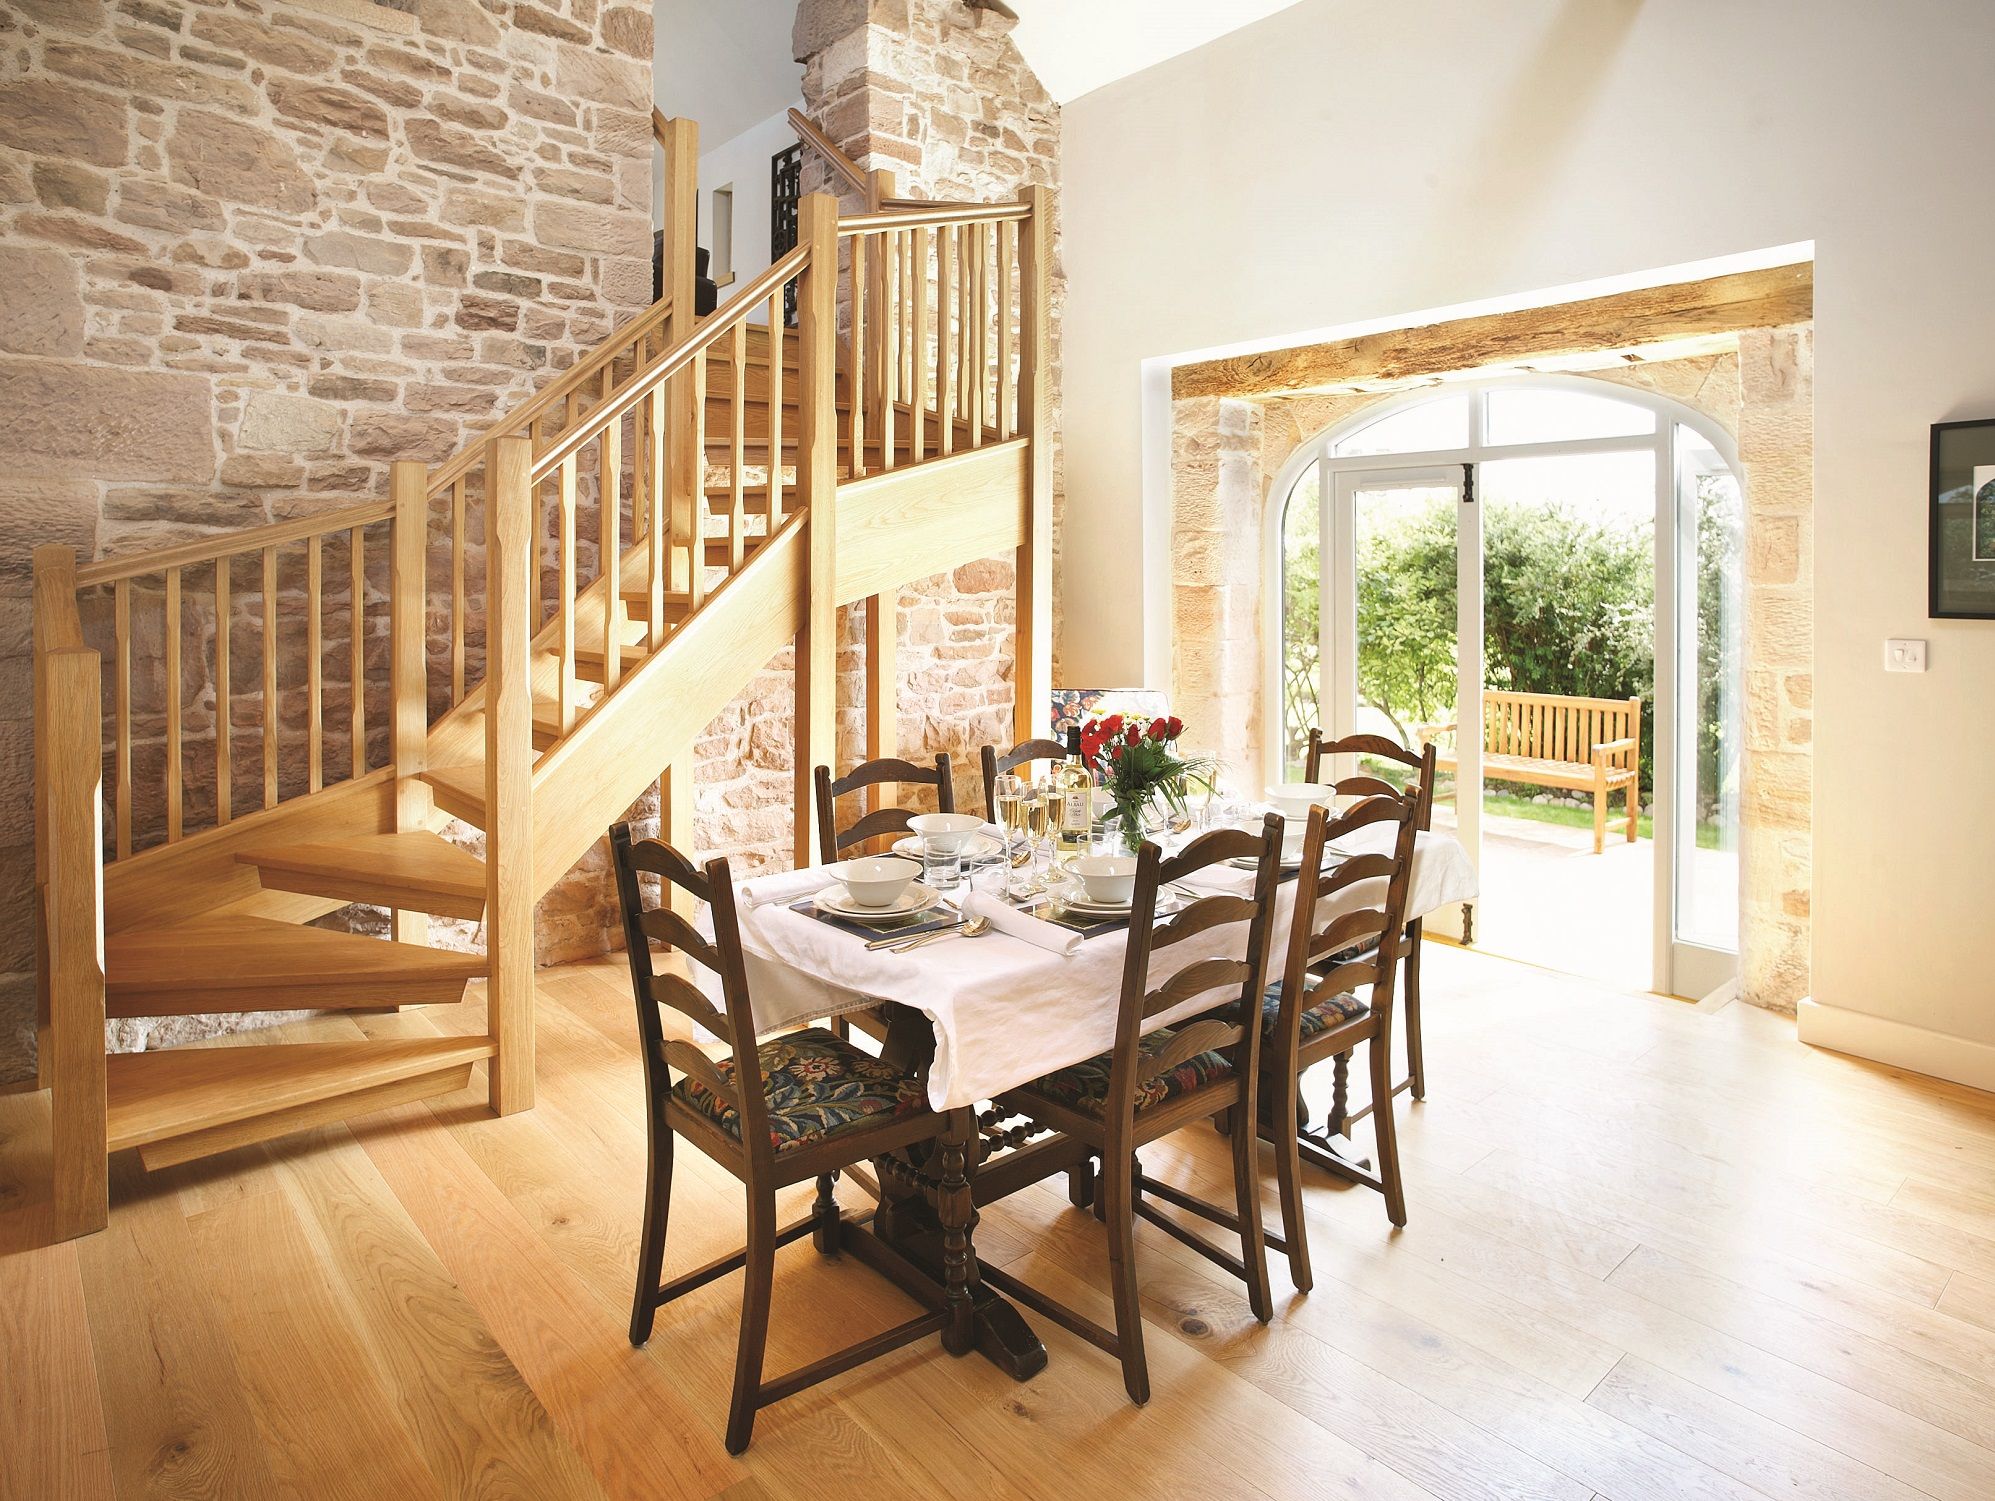 Wythburn Cottage large open plan breakfasting kitchen opening to private terrace with dining table that converts to a billiards/pool table